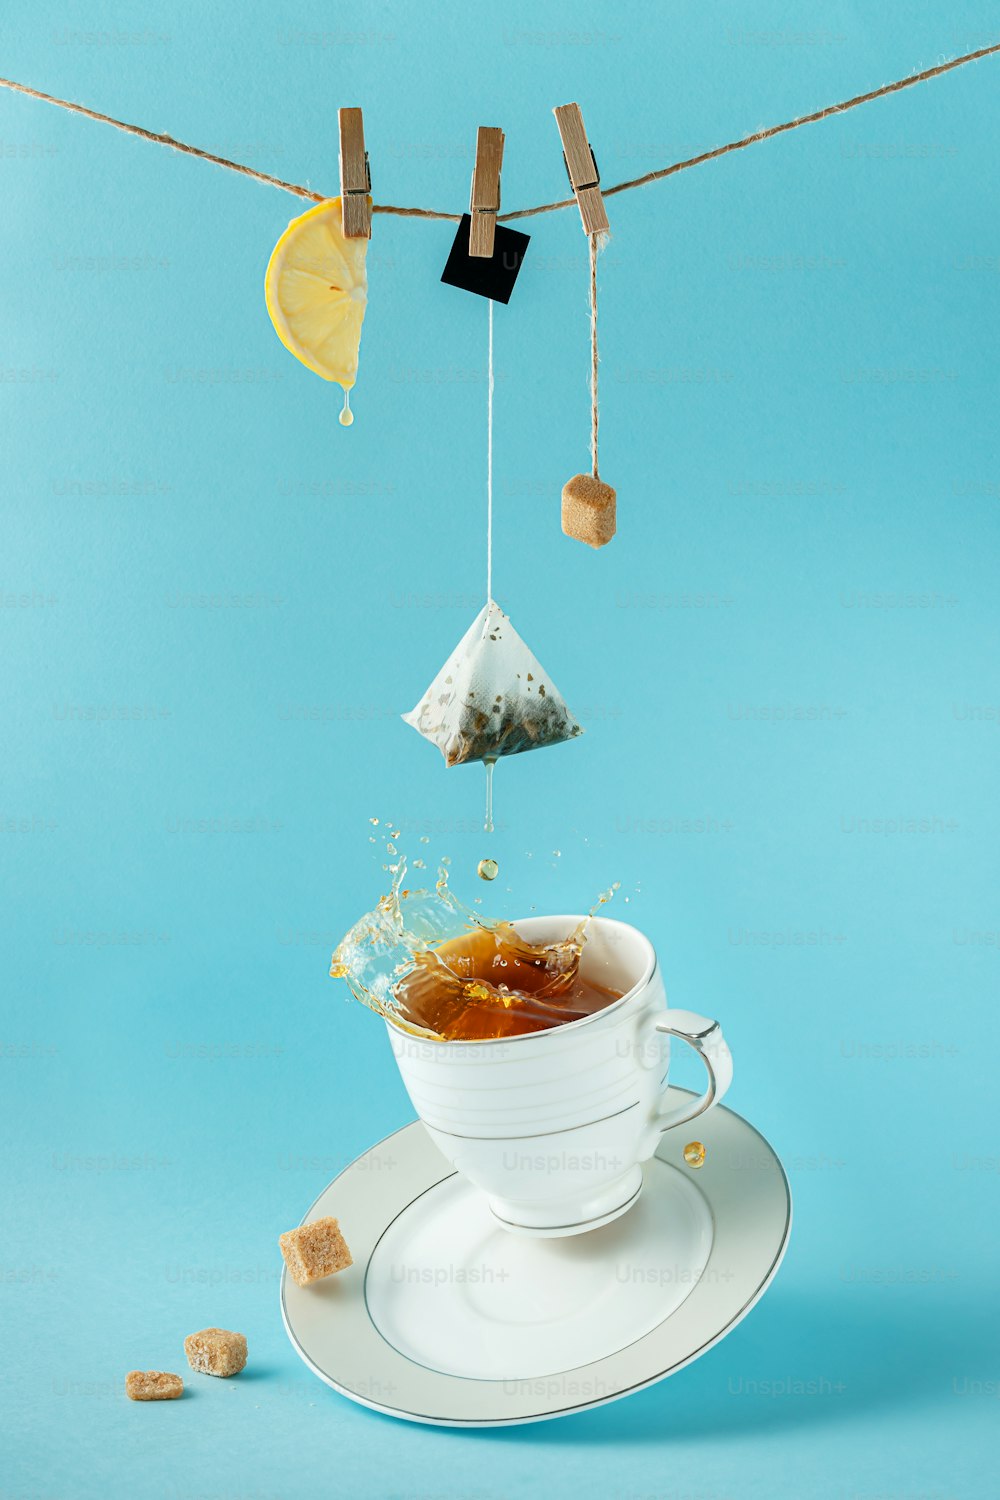 Tea bag, lemon and sugar hanging on the rope over splashing tea in the cup on blue background. Creative still life